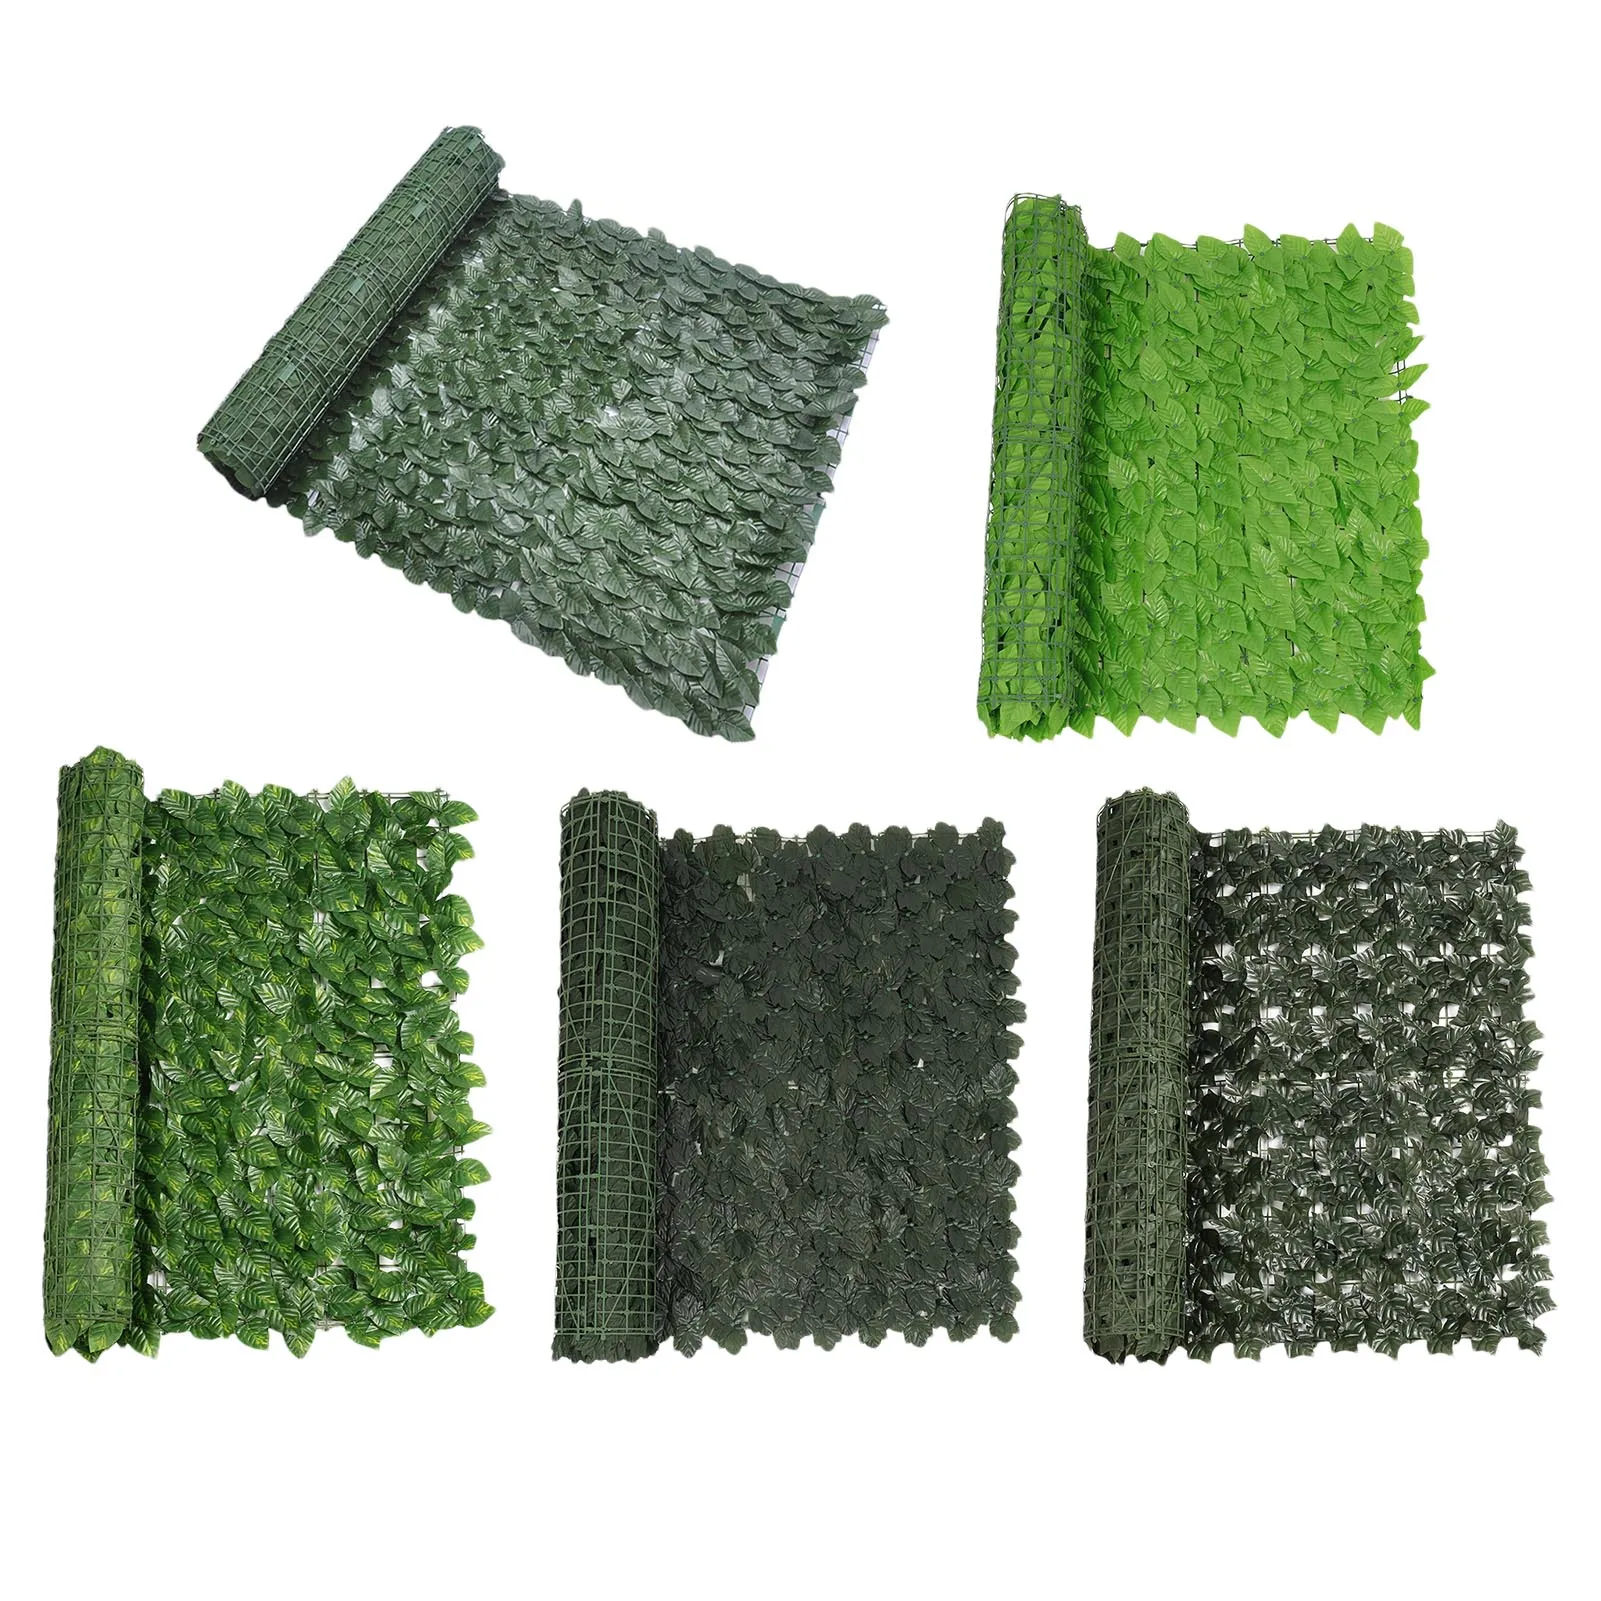 Artificial Ivy Fence Screening Expanding Trellis Fence Roll With Faux Ivy Leaves Privacy Hedge Wall Landscaping Garden Fence